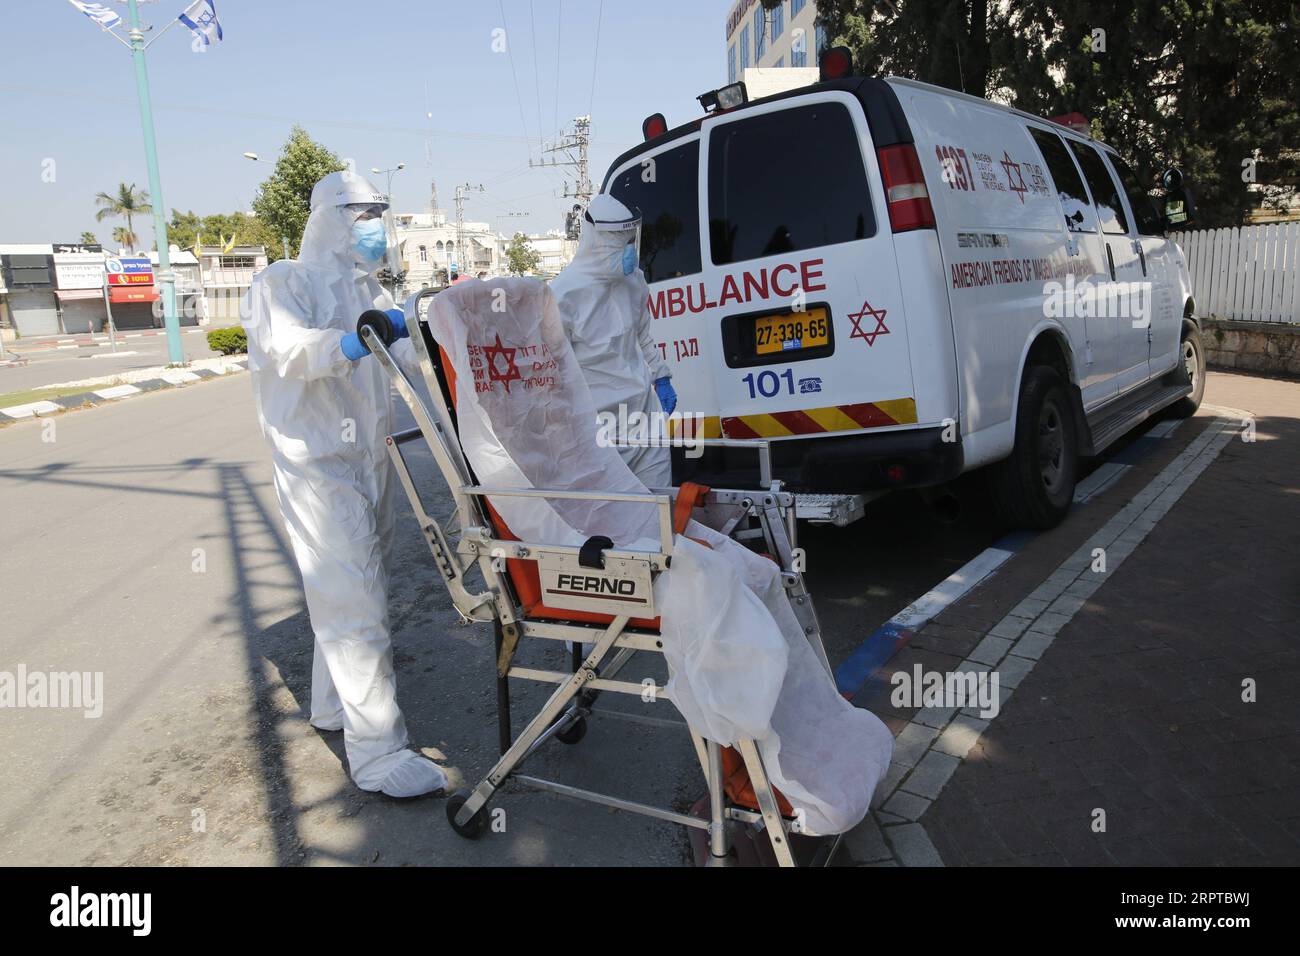 200414 -- RAMLA, April 14, 2020 Xinhua -- Medical workers wearing masks from the Israeli Magen David Adom national emergency service work amid COVID-19 pandemic in the central Israeli city of Ramla on April 13, 2020. The number of COVID-19 cases has risen to 11,586 in Israel after 441 new ones were added on Monday, the Israeli health ministry said. Photo by Gil Cohen Magen/Xinhua MIDEAST-RAMLA-COVID-19 PUBLICATIONxNOTxINxCHN Stock Photo